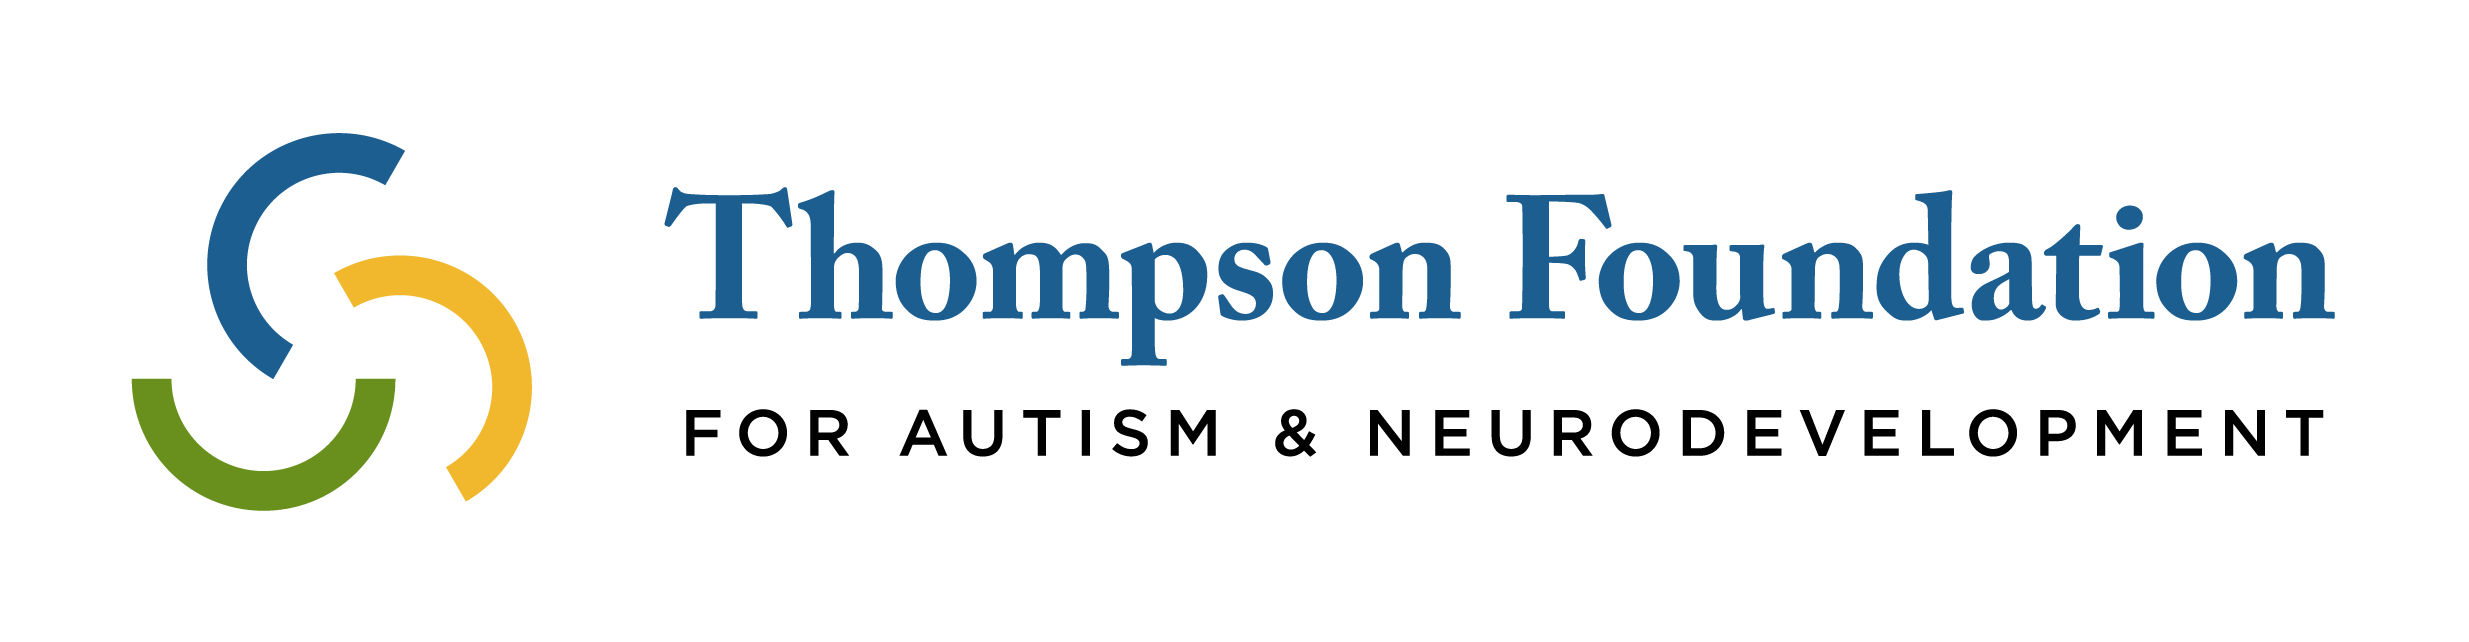 Thompson Foundation for Autism & Neurodeveopment